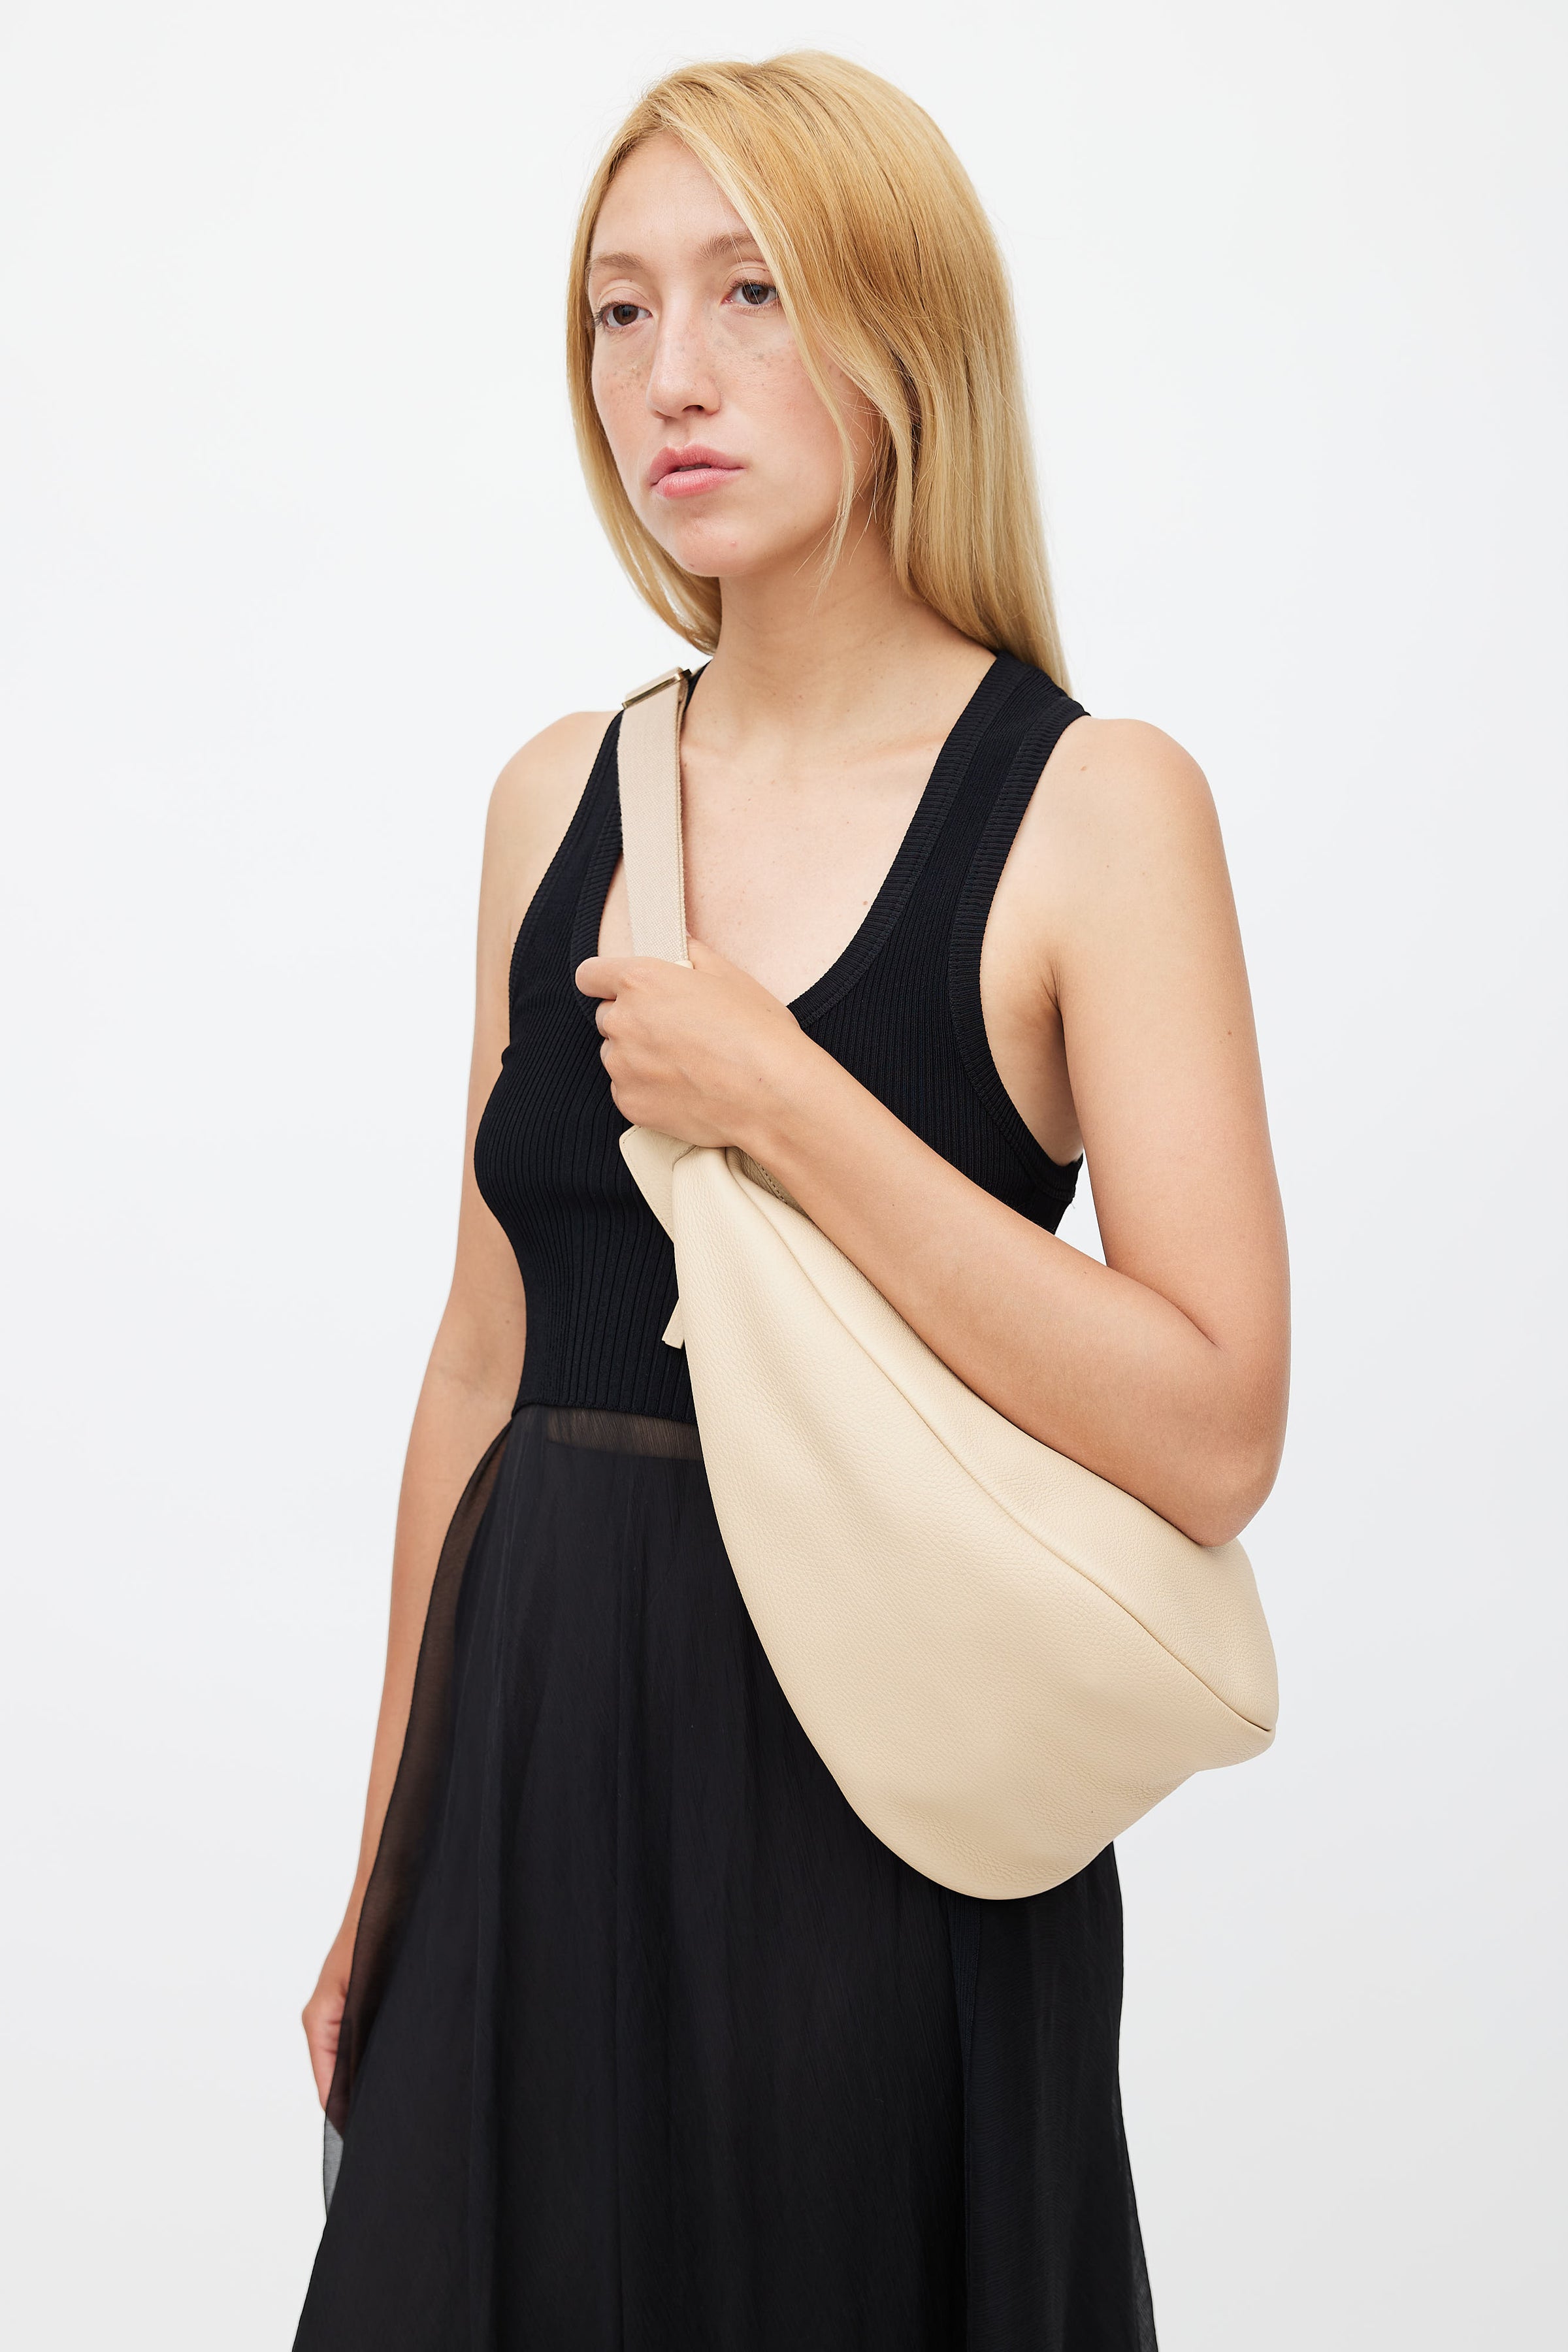 Is The Row's Slouchy Banana Bag the Next It Bag?